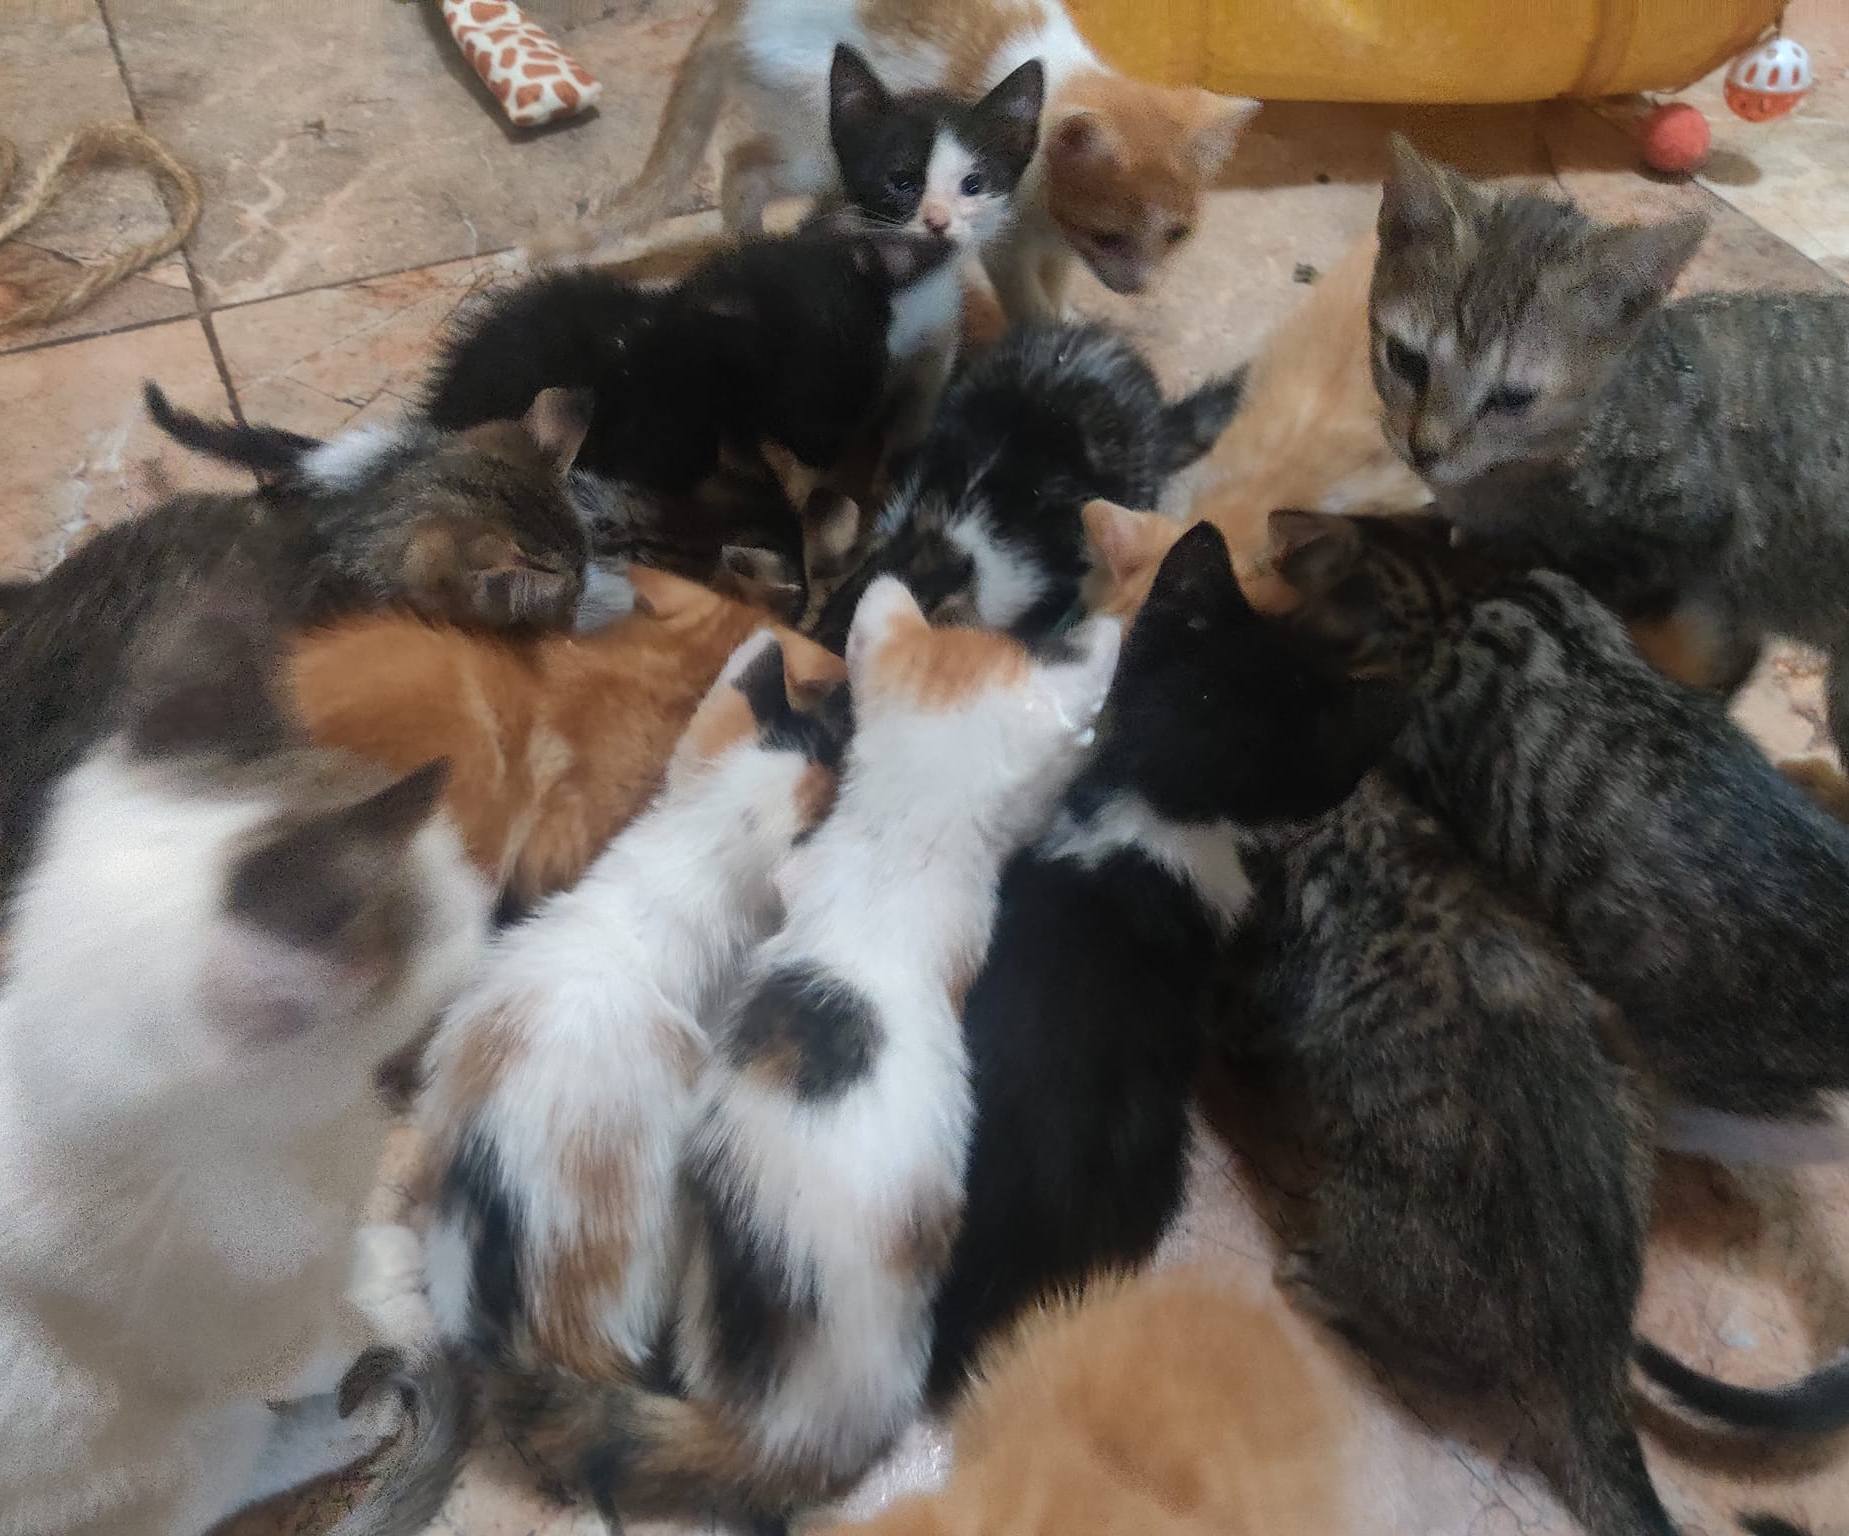 Orphaned, stray and injured cats need homes, food and medical treatment